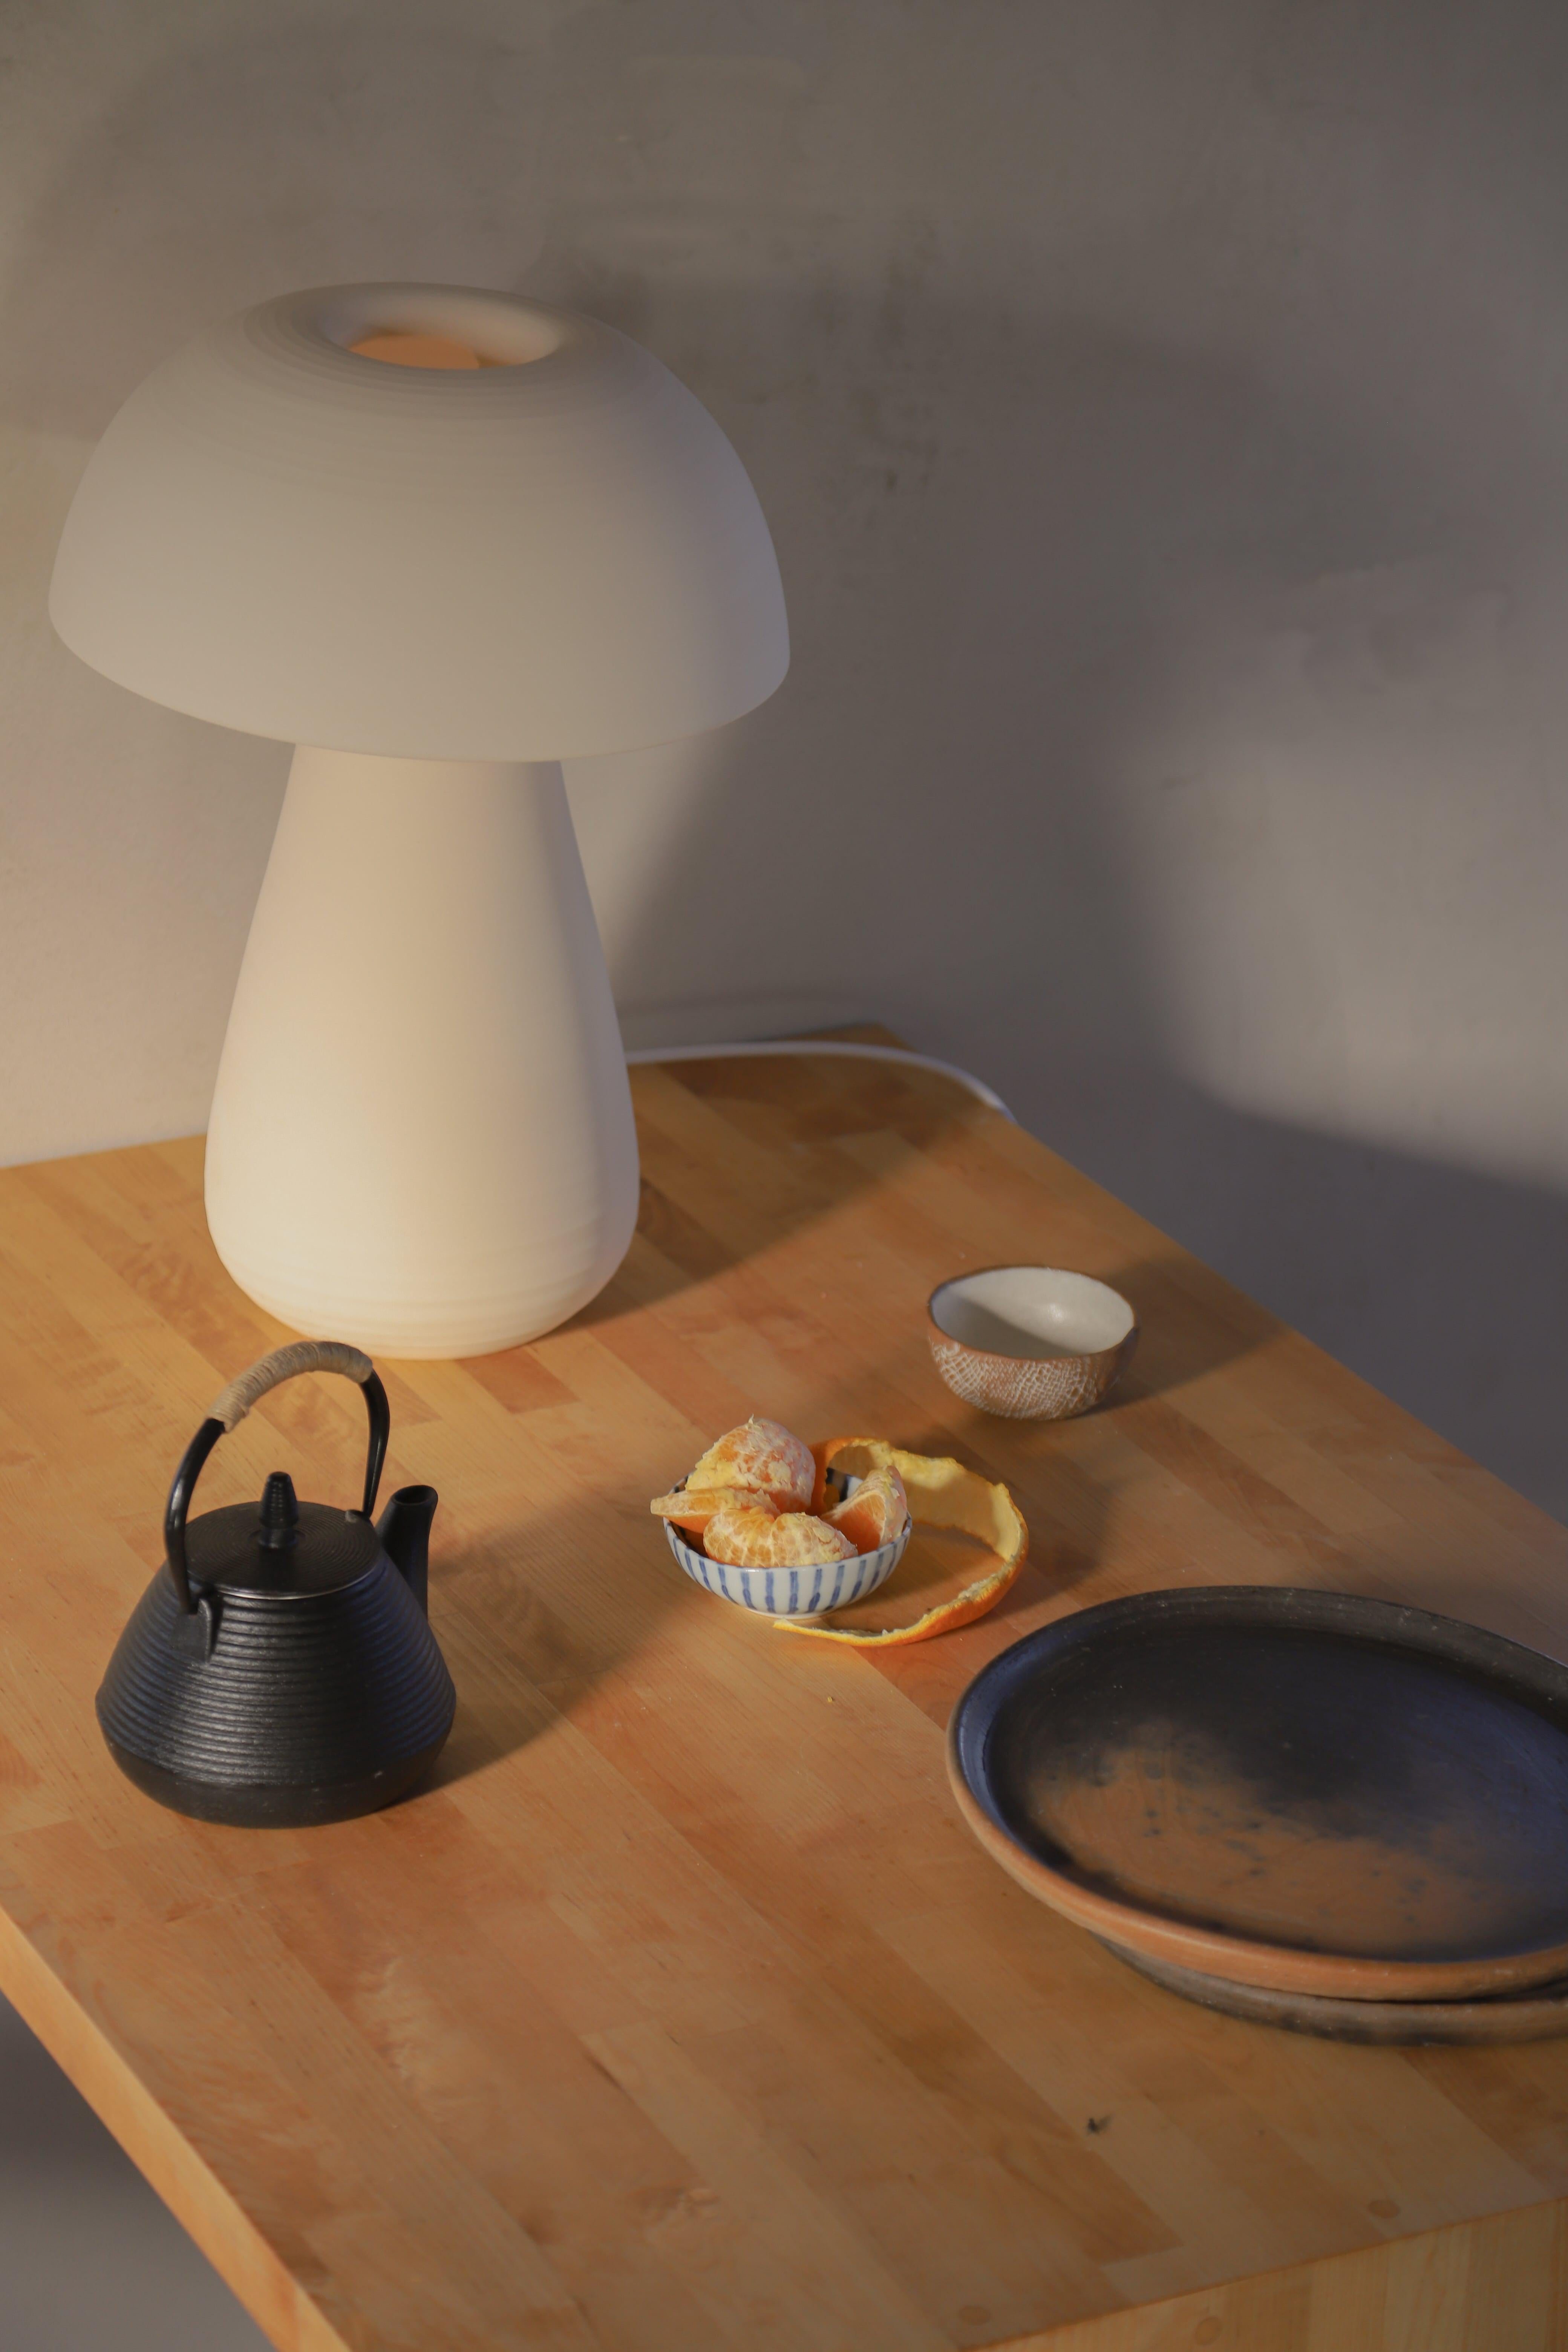 Post-Modern Small Mushroom Lamp by Nick Pourfard For Sale